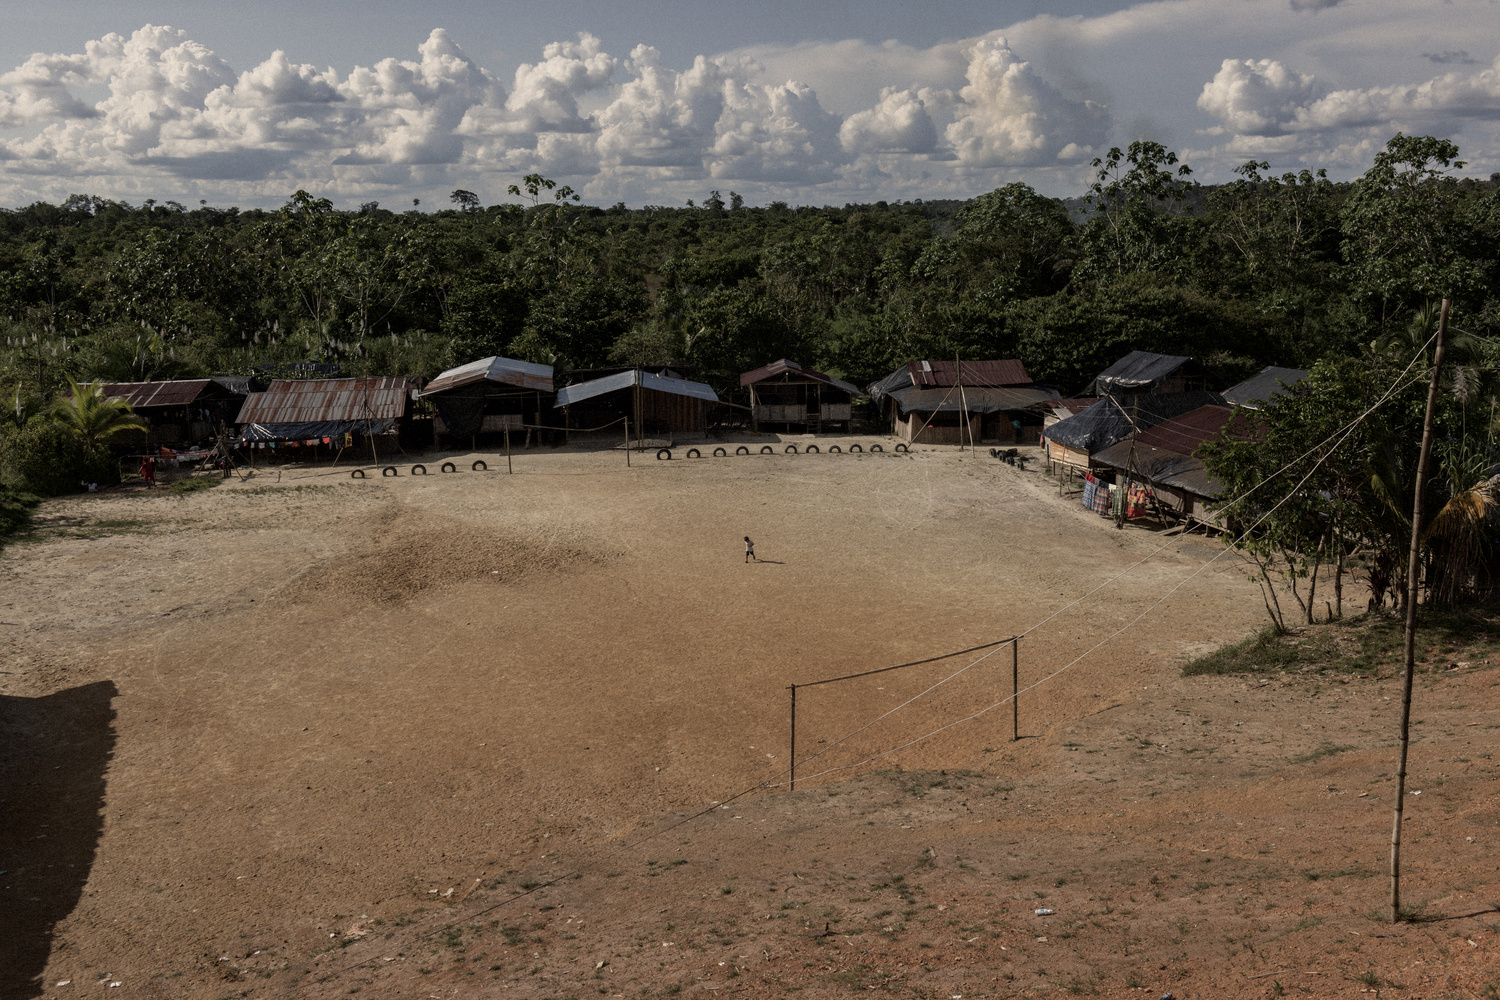 A dirt square and a few houses make up a village on the edge of the jungle.